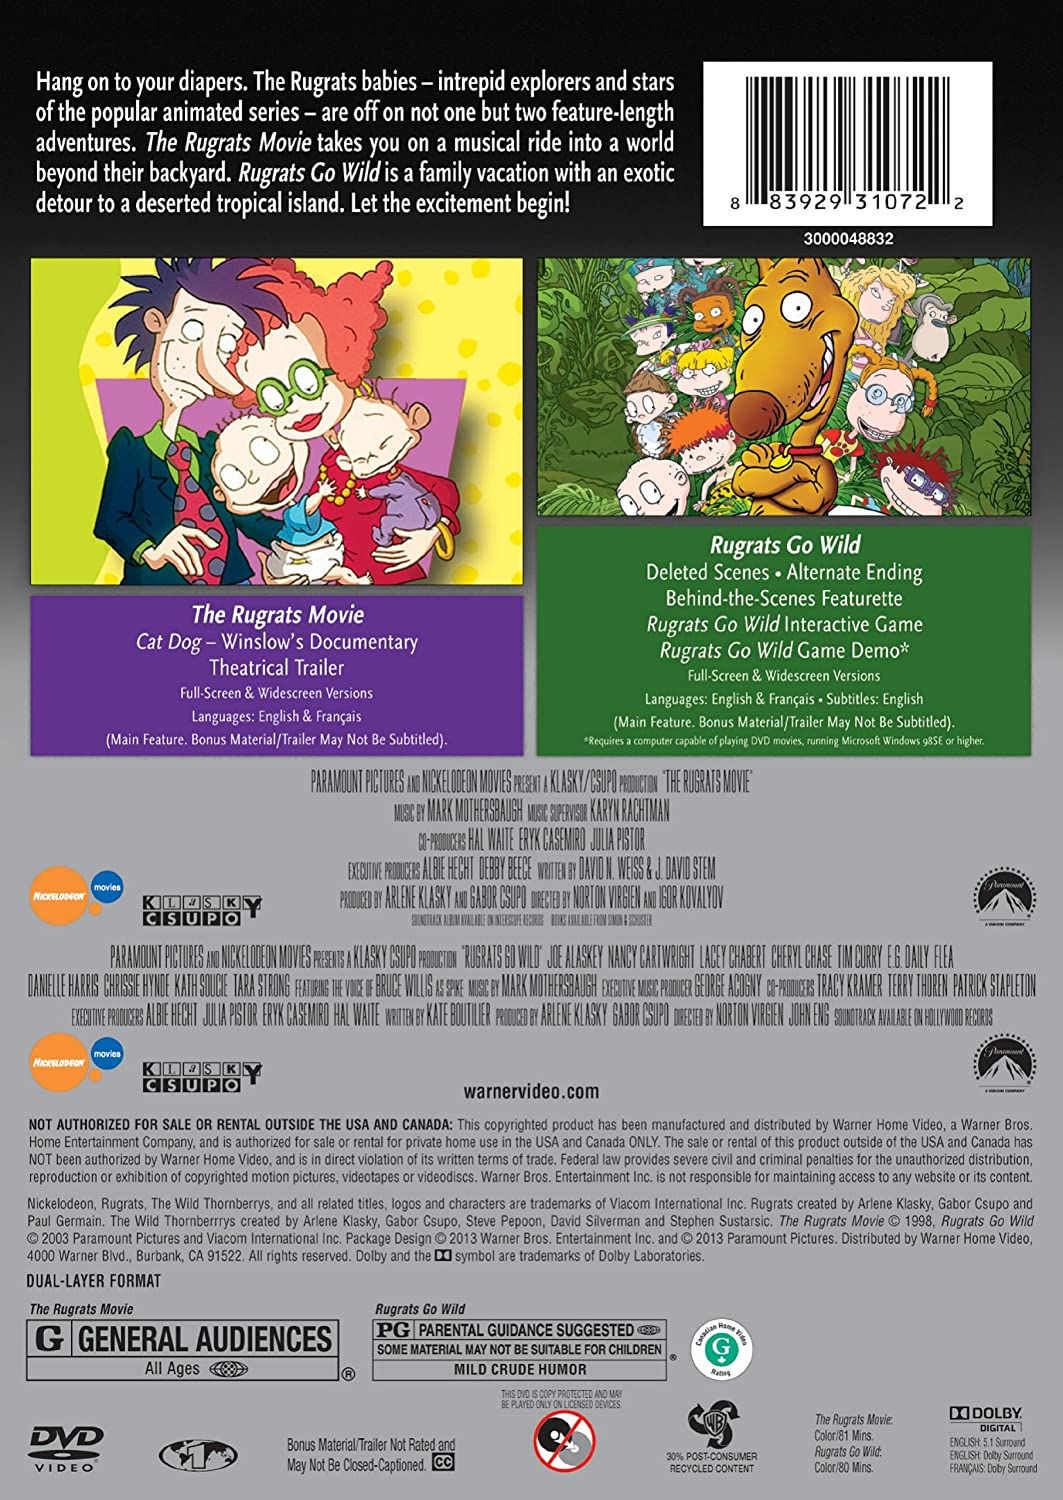 The Rugrats Movie / Rugrats Go Wild - image 2 of 2